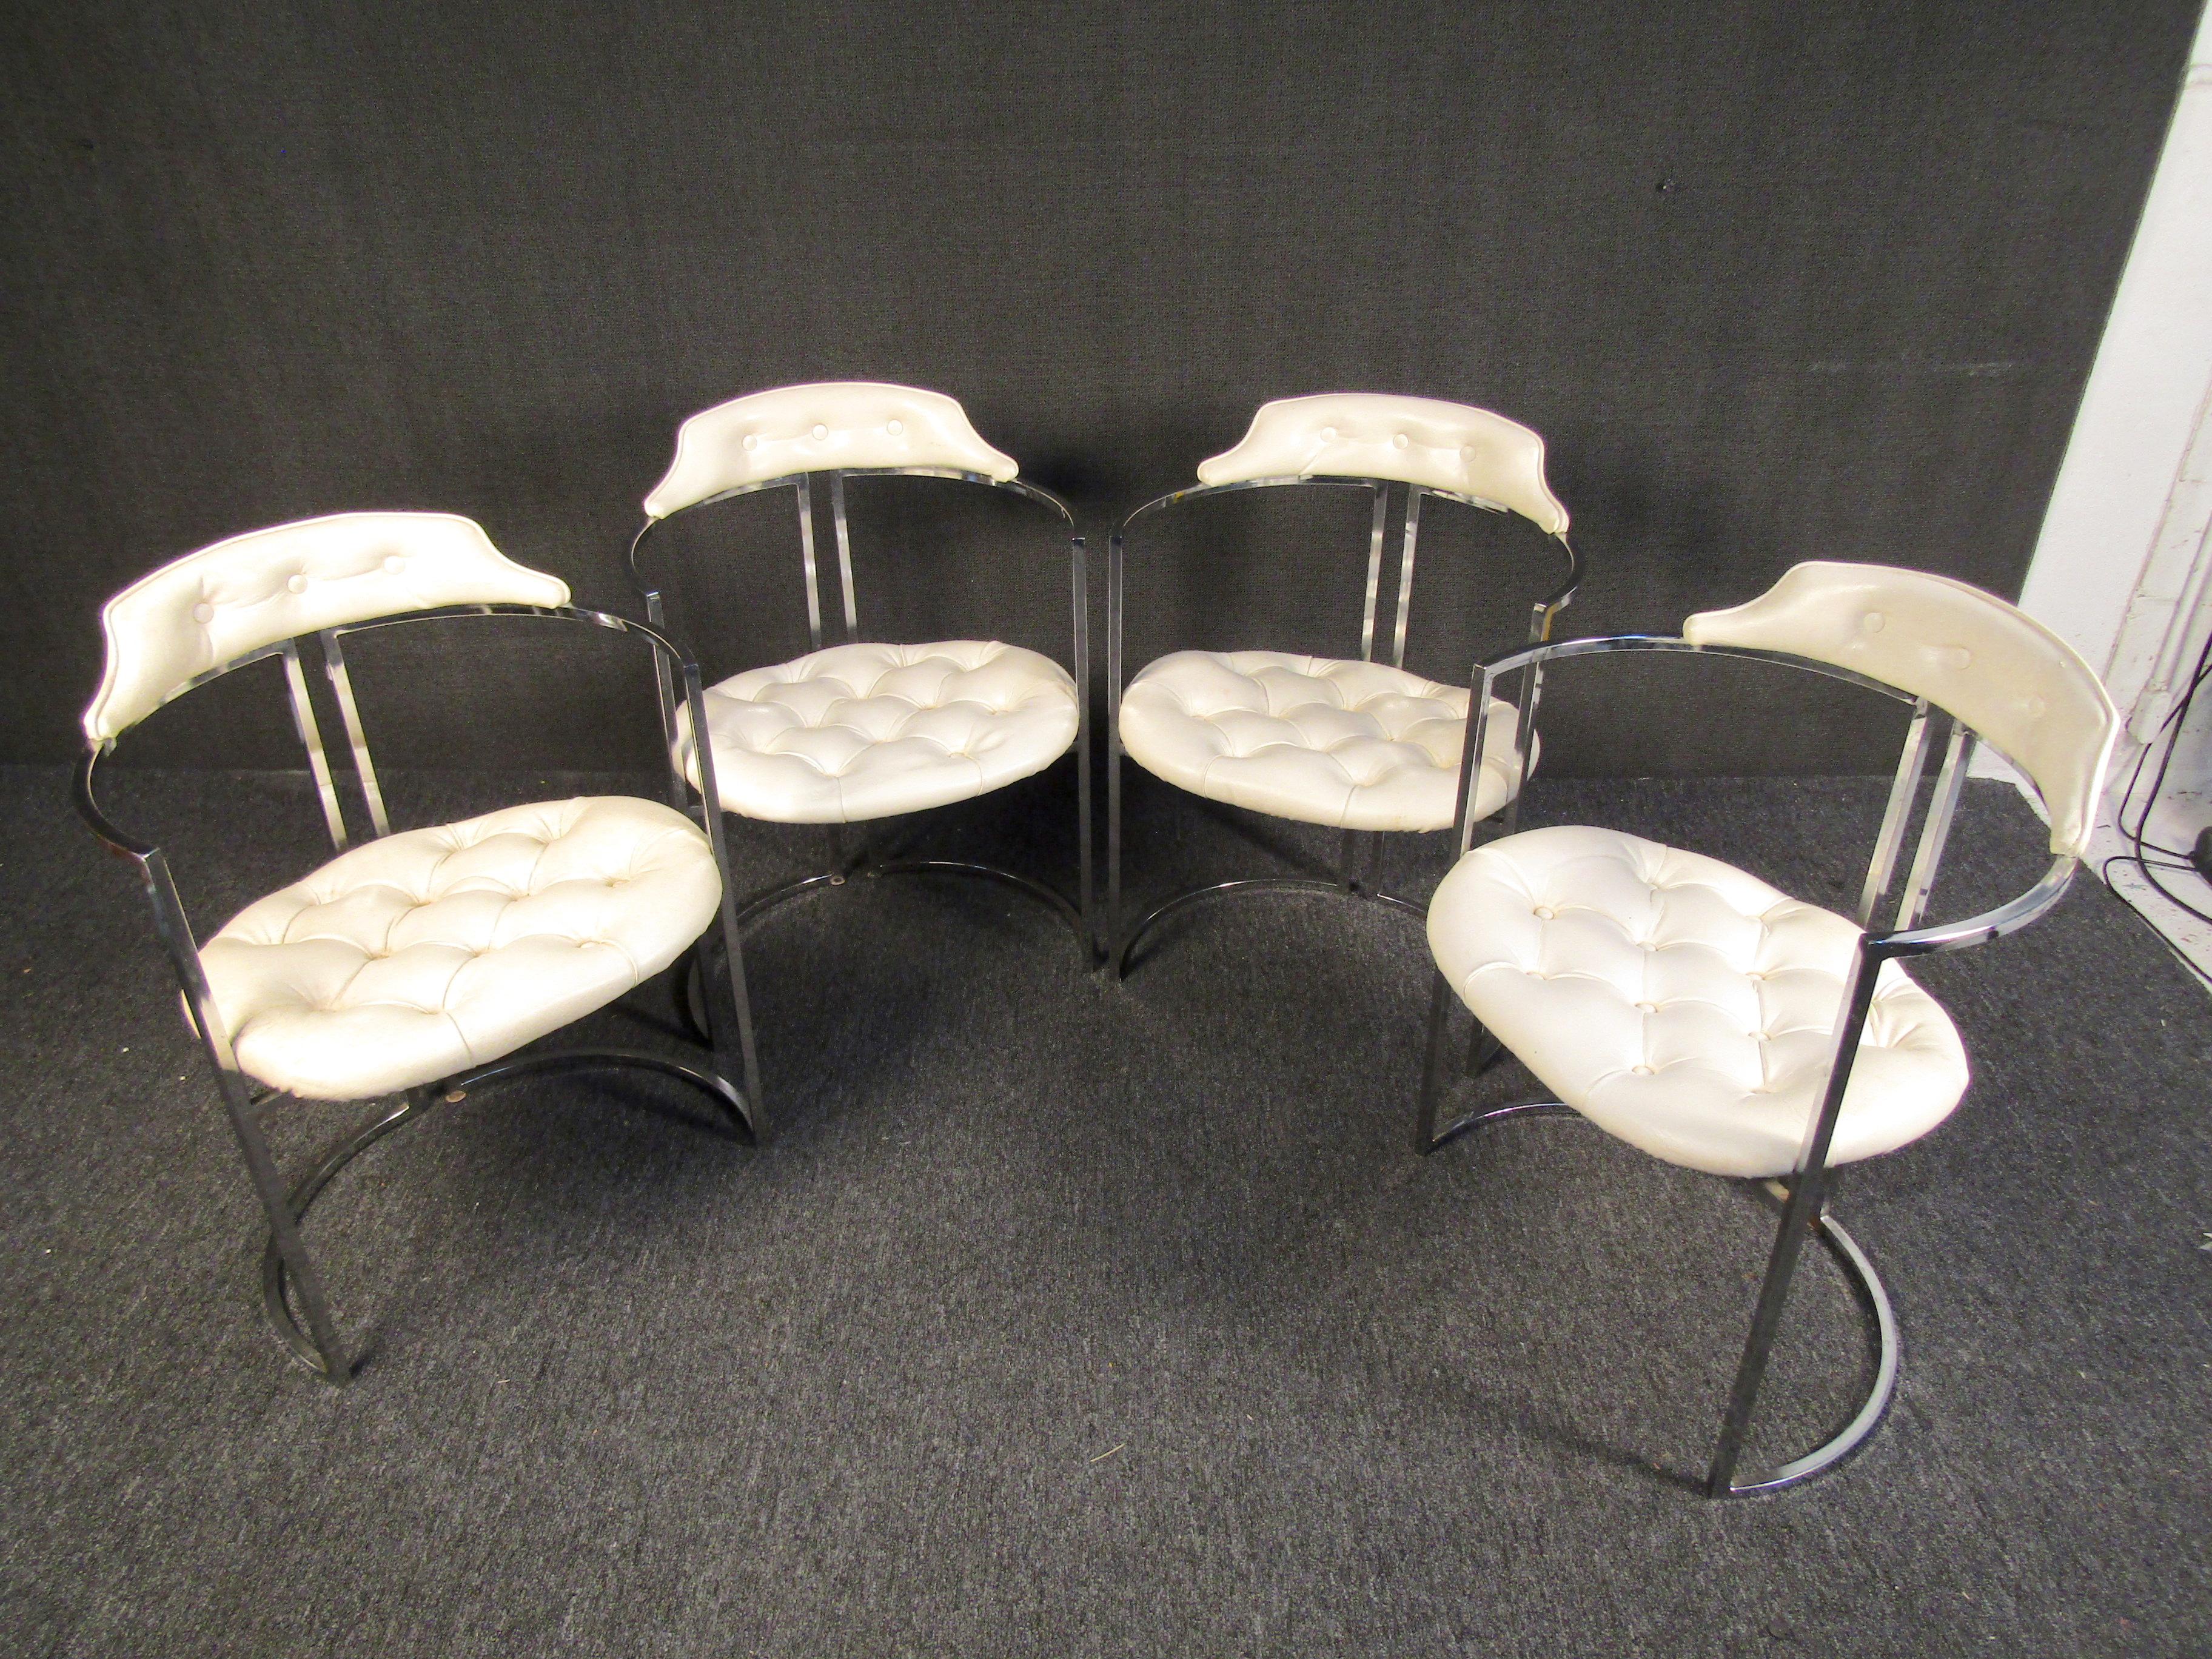 A set of four impressive Mid-Century Modern chairs styled after the designs of Milo Baughman. Curved backs and a circular base give these chairs an interesting geometric form that is complemented by white leather cushions and chrome. Please confirm